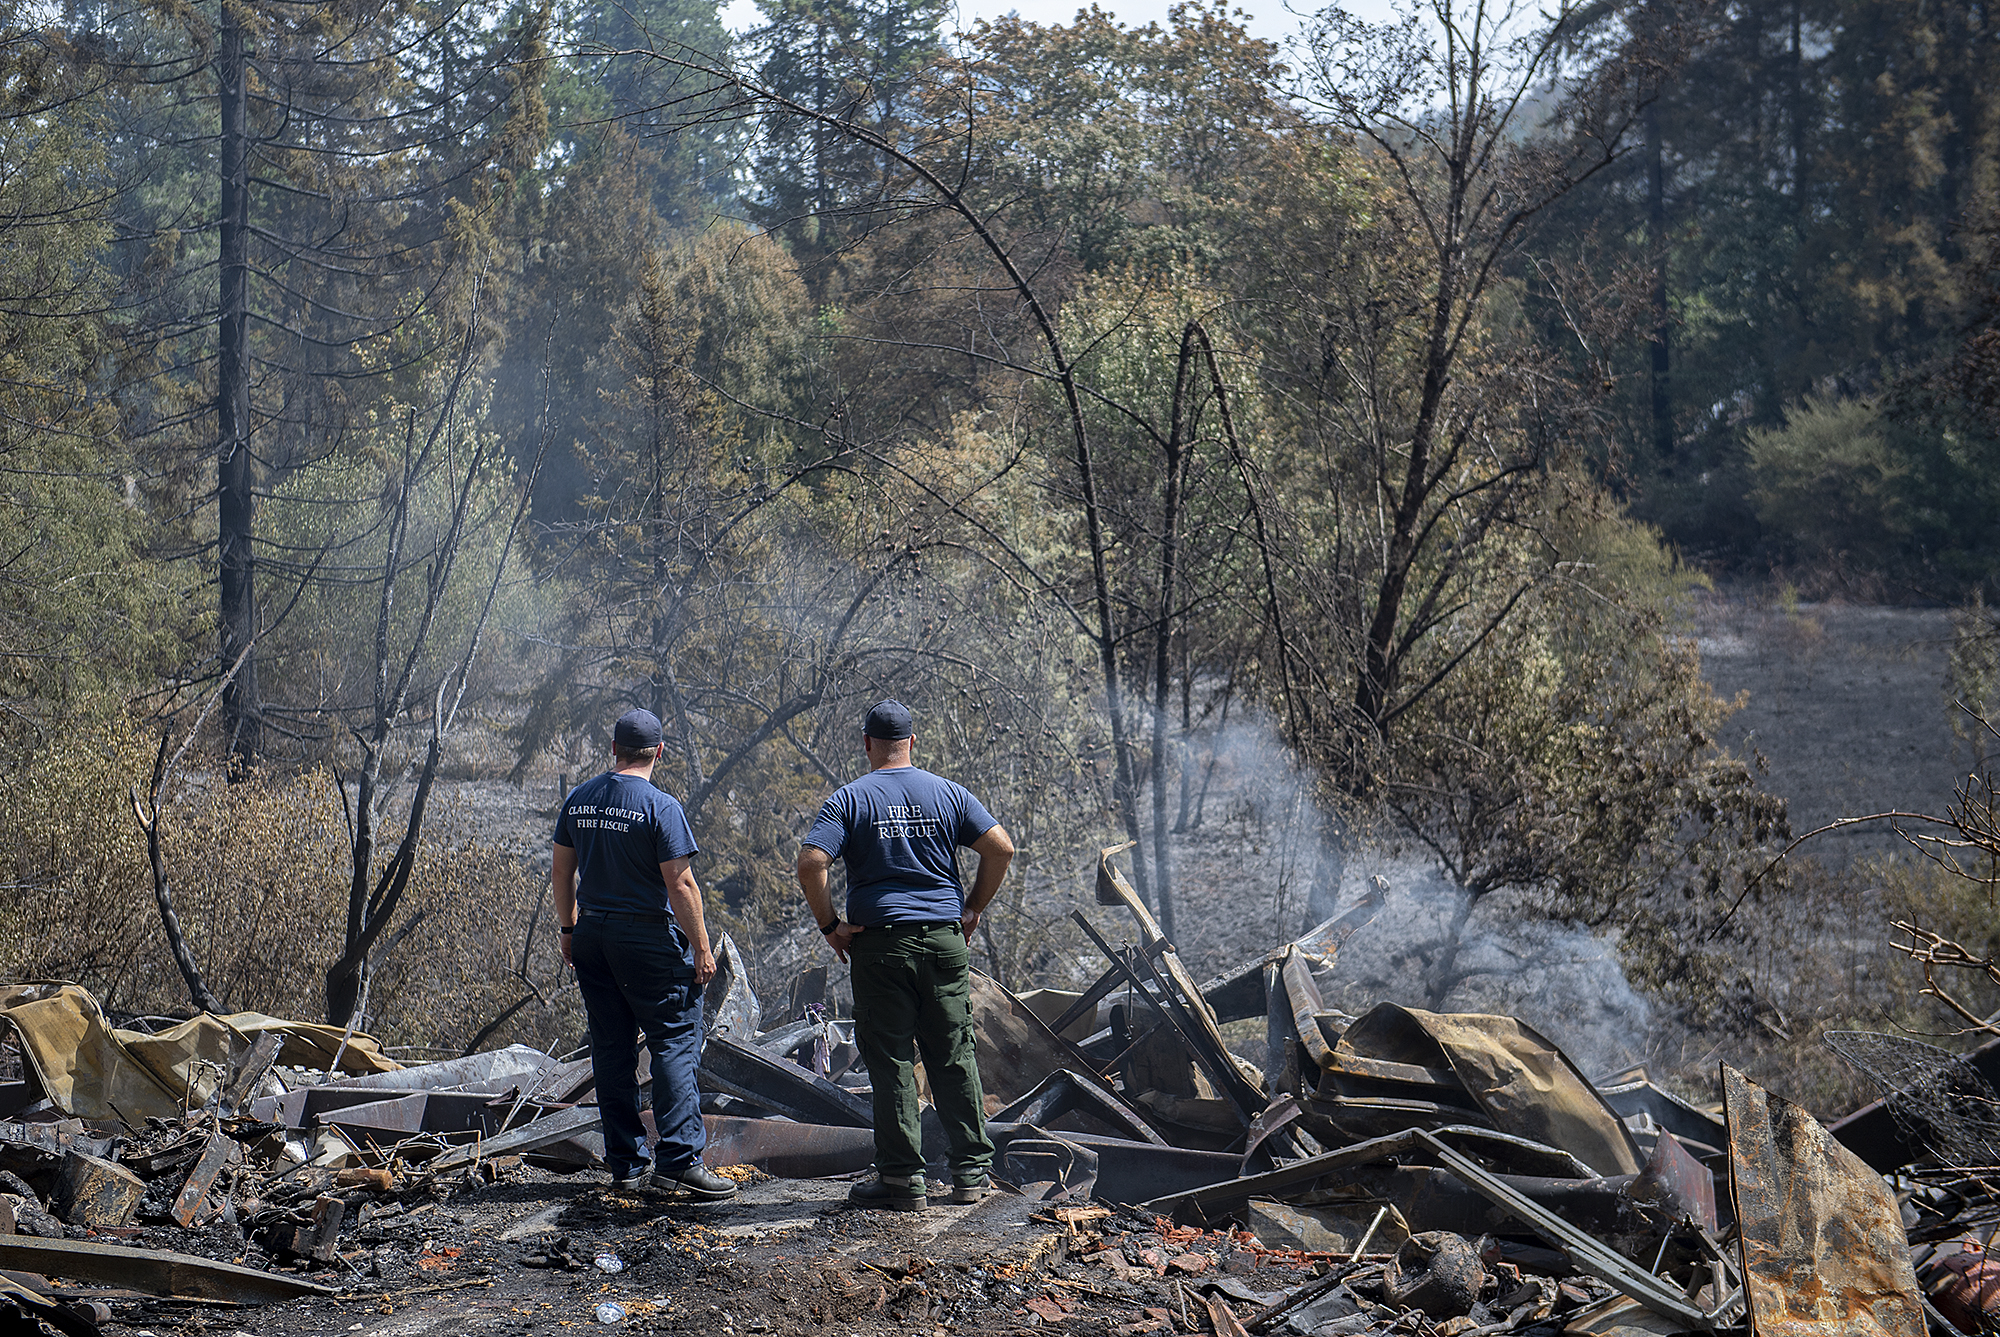 Firefighters Michael Hickey, left, and Joe Talarico survey the scene Thursday afternoon, Aug. 17, 2023, after a blaze destroyed a primary residence and surrounding structures on the same property near La Center on Wednesday night. The incident sparked a significant brush fire that prompted evacuation warnings well into the north county community.